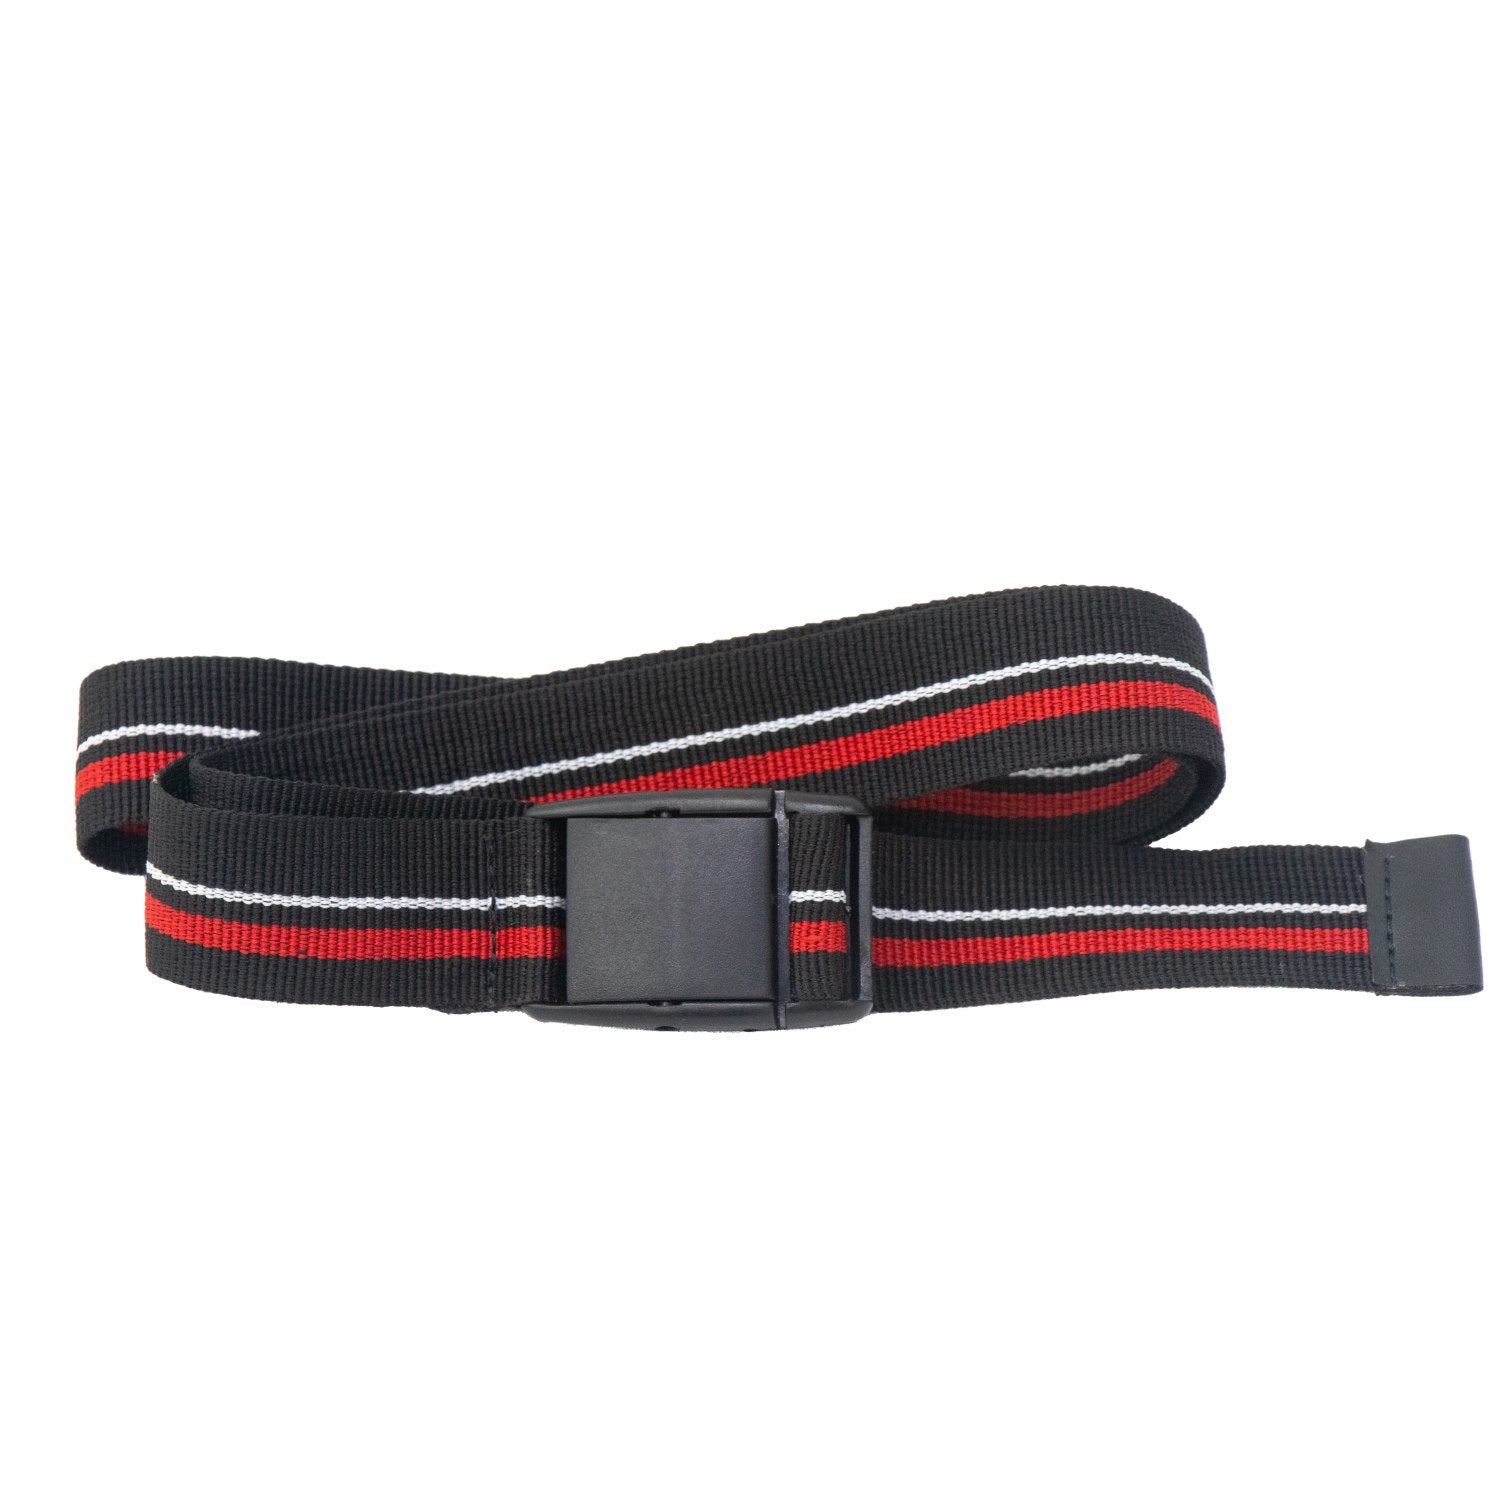 Buy Gokyo Belt for Hiking Trousers Red | Belt at Gokyo Outdoor Clothing & Gear